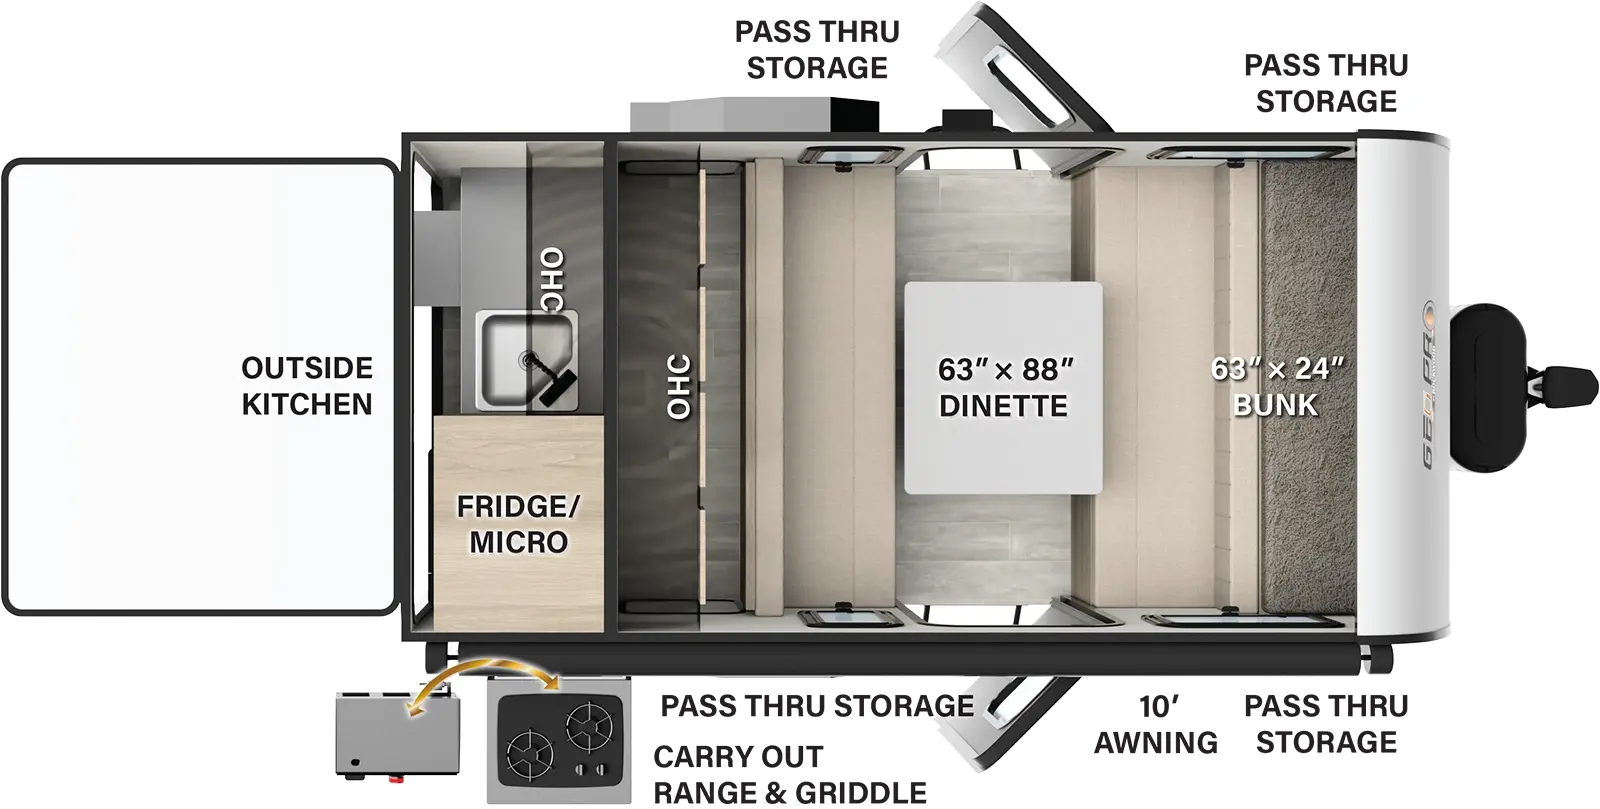 The G14D has zero slideouts and entry doors on each side. Exterior features front passthrough storage, mid passthrough storage, 10 foot awning, carryout range and griddle, and rear outside kitchen with refrigerator, microwave, sink and overhead cabinet. Interior layout front to back: front bunk, dinette table, rear overhead cabinet.